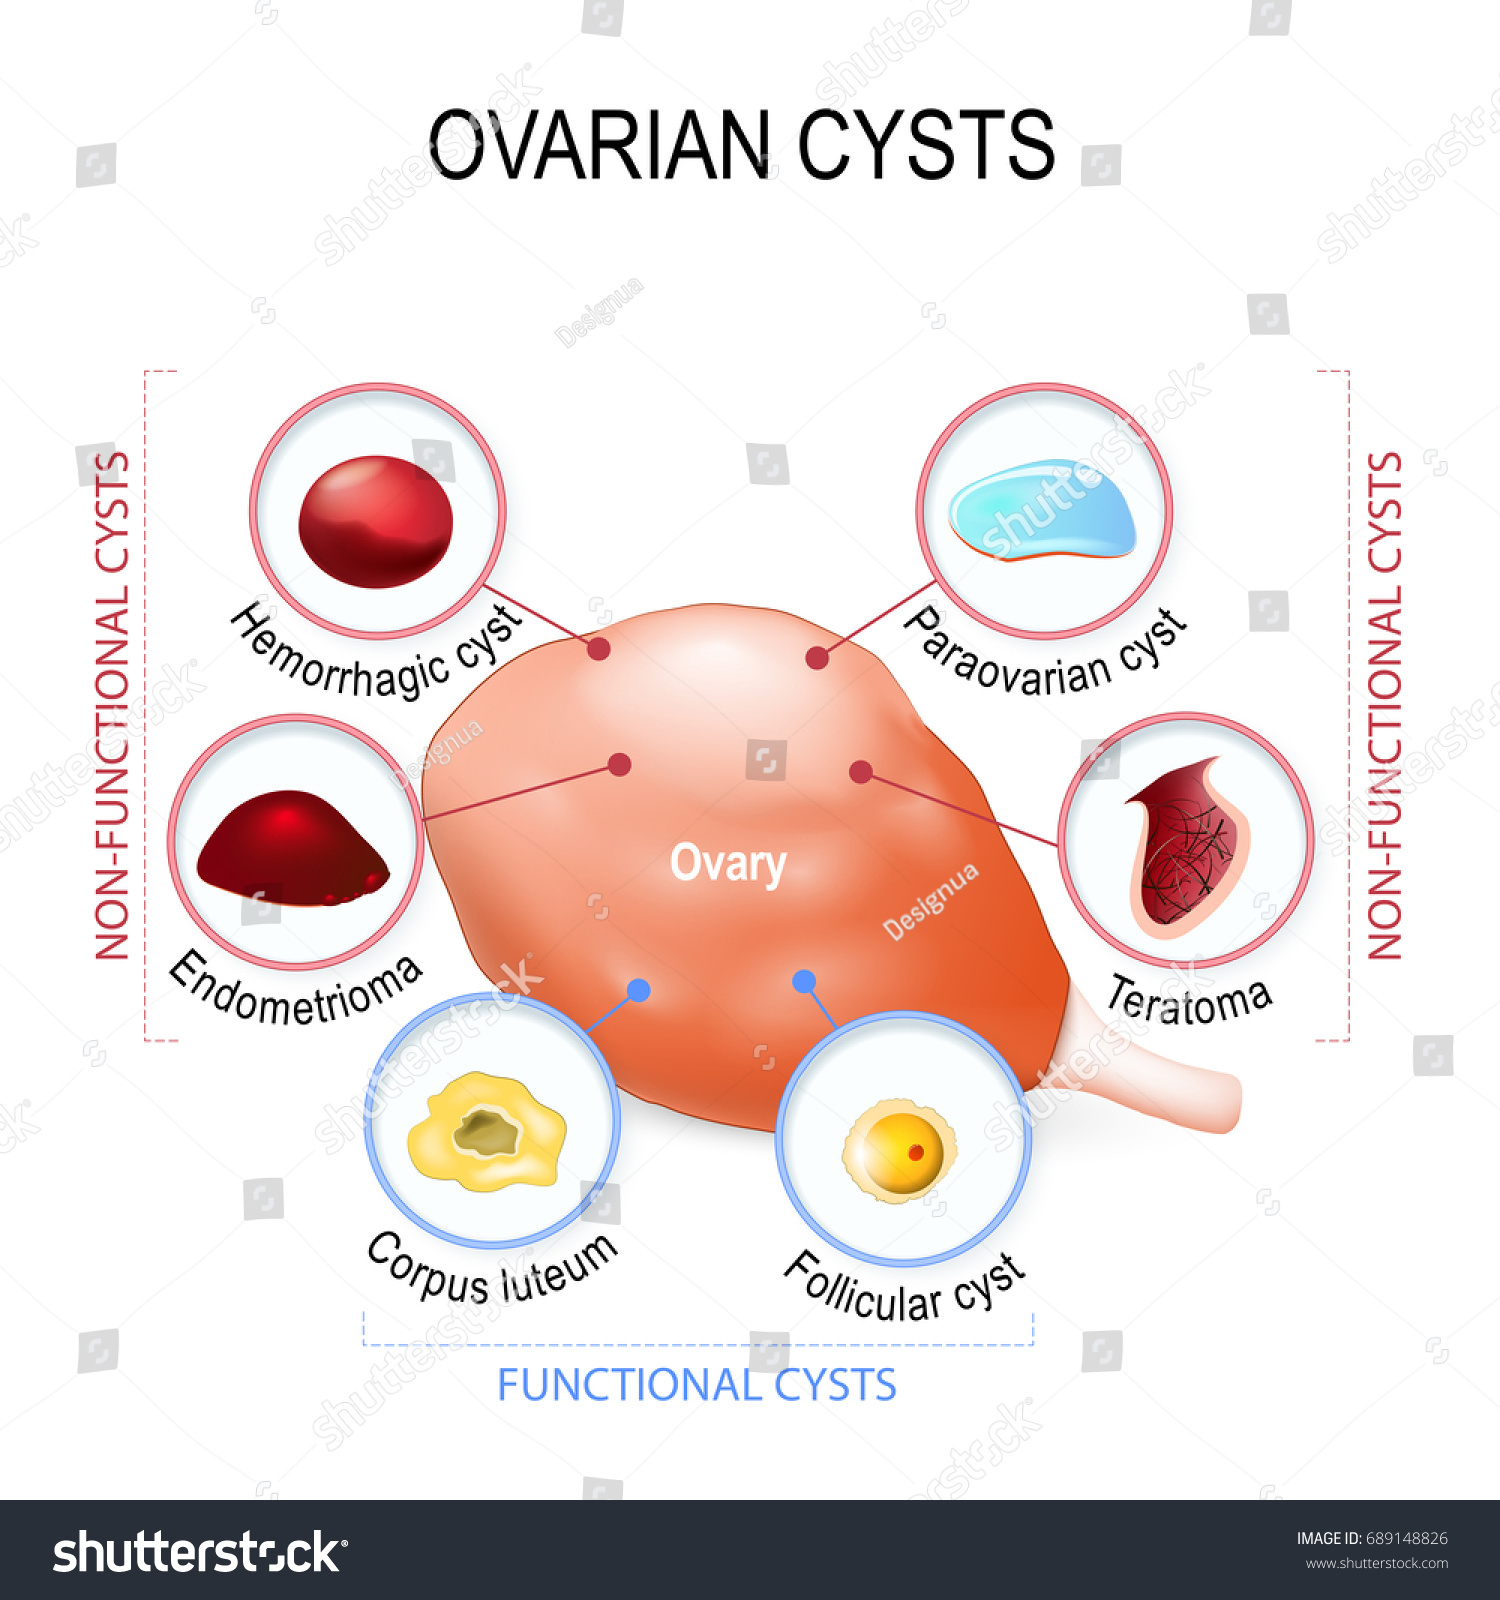 Ovarian Cysts Stock Vector (Royalty Free) 689148826